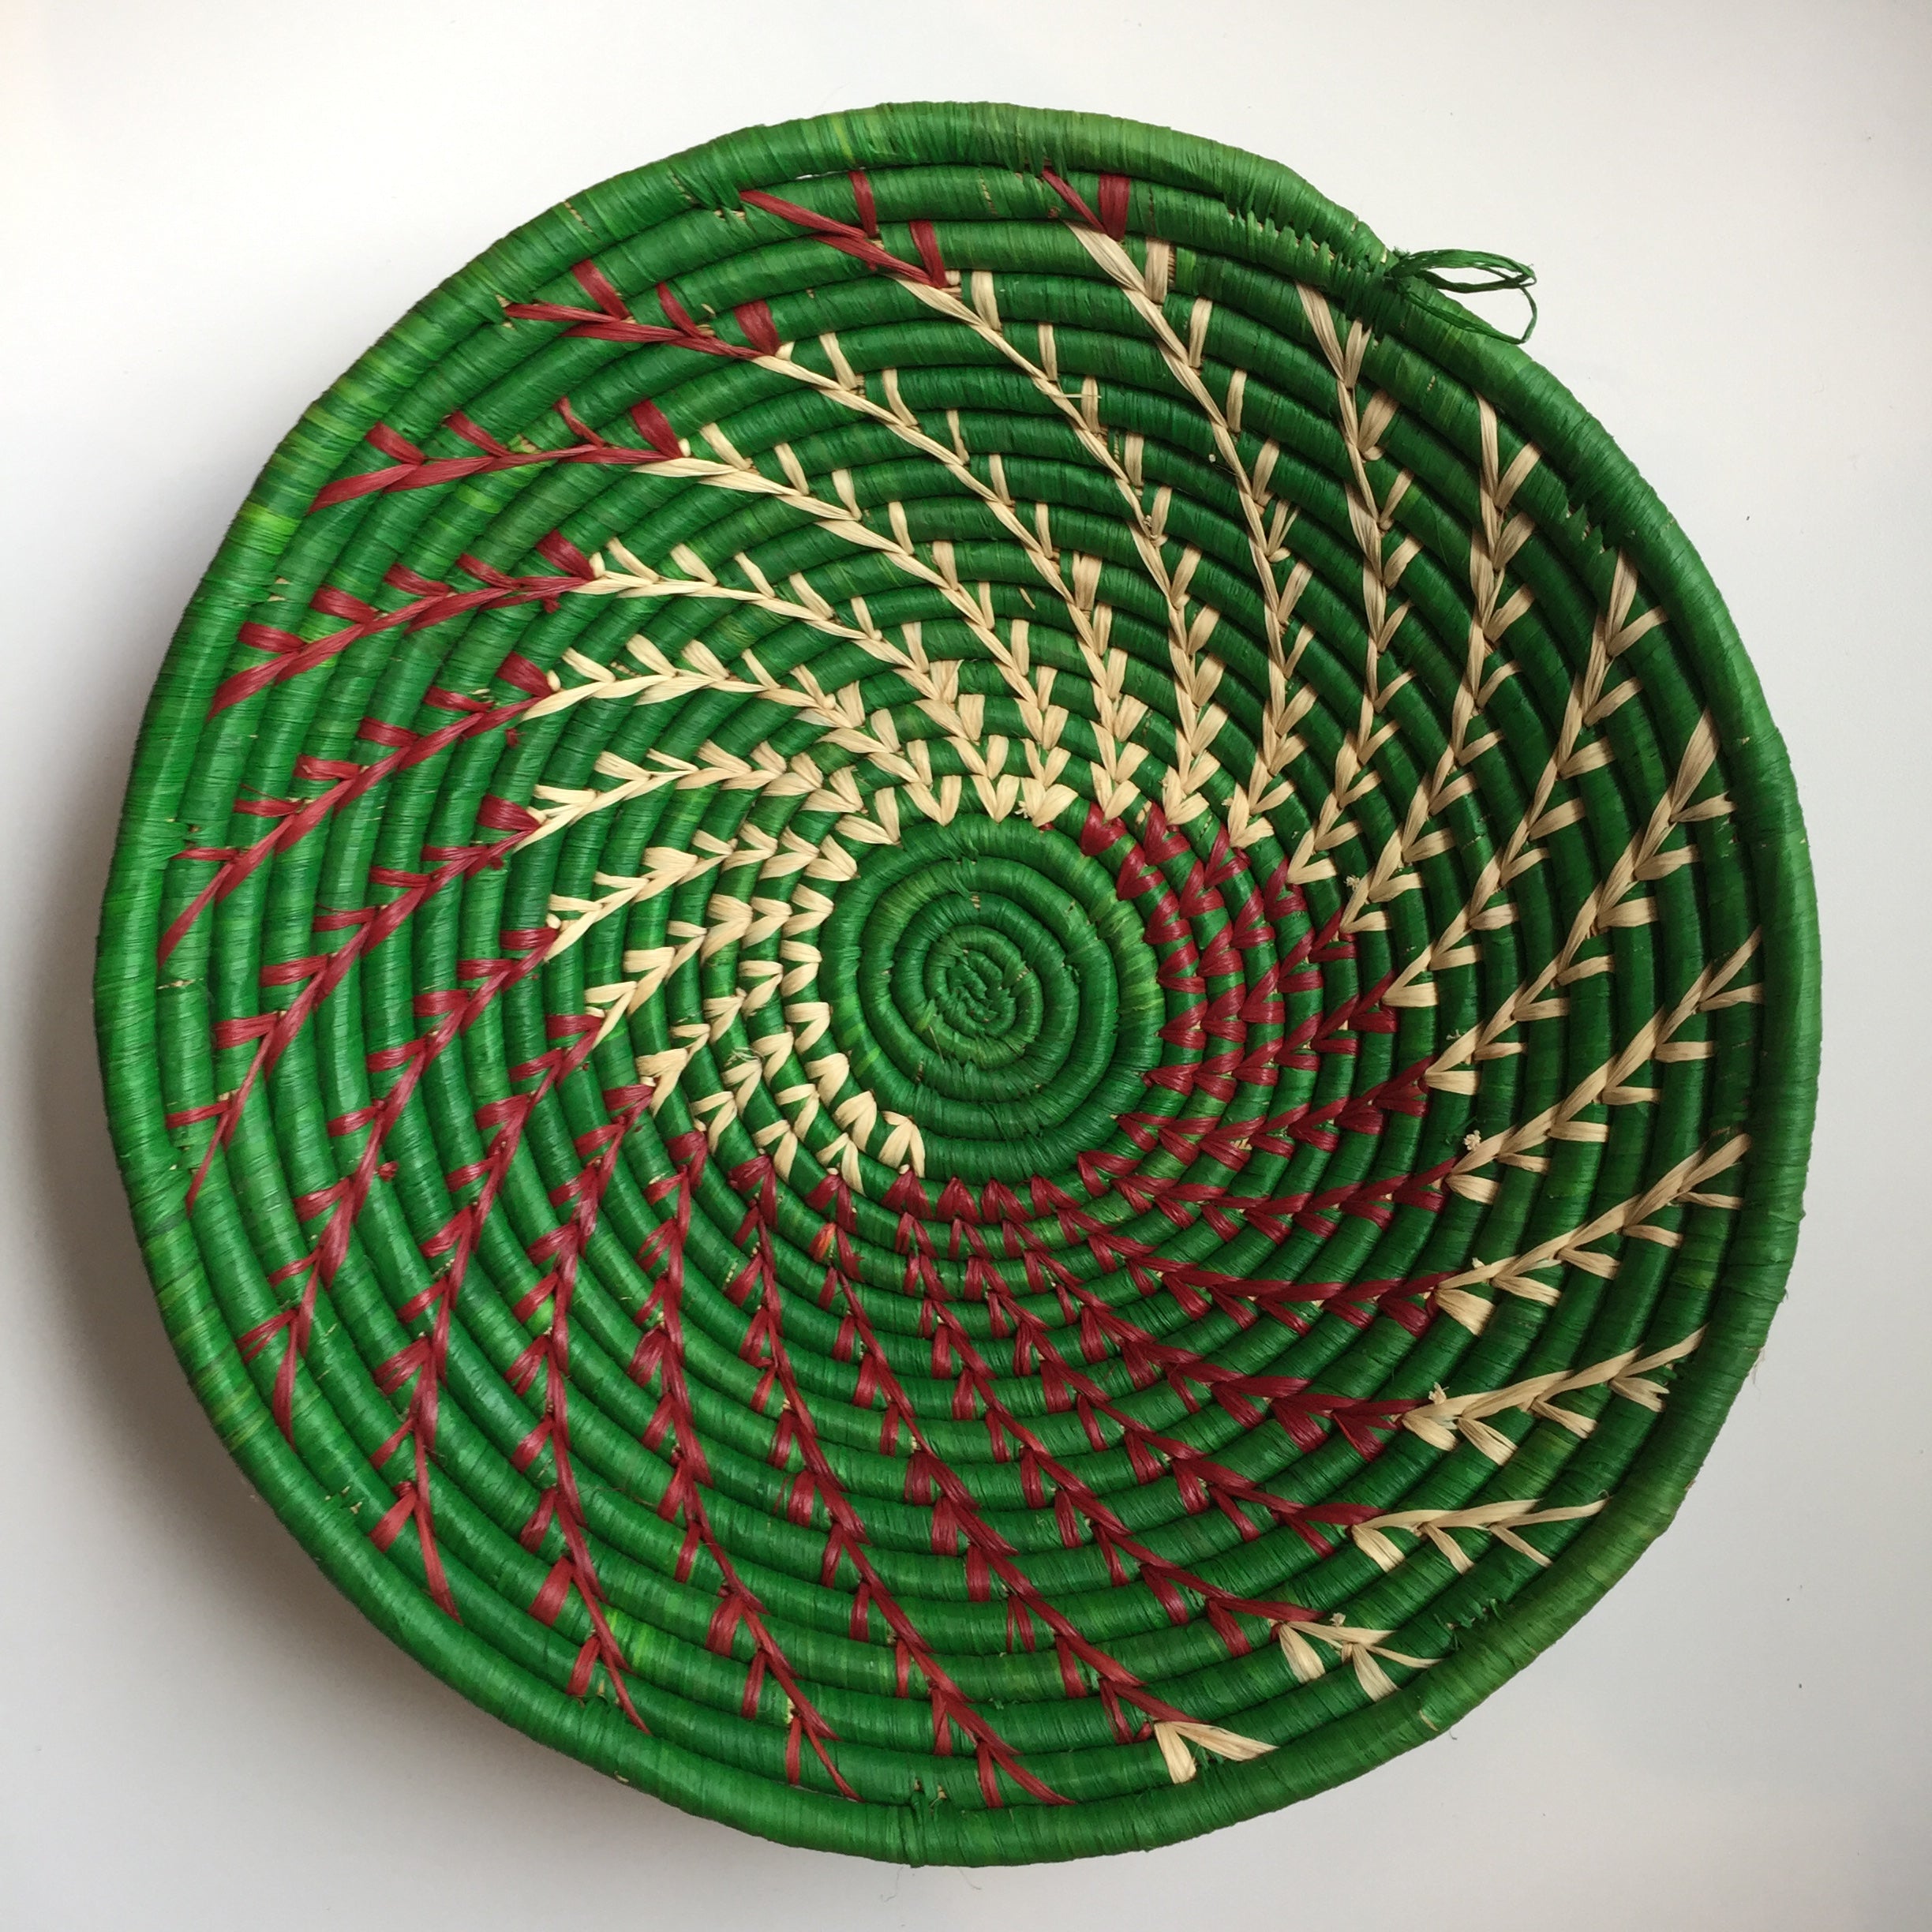 Green and red swirl woven bowls